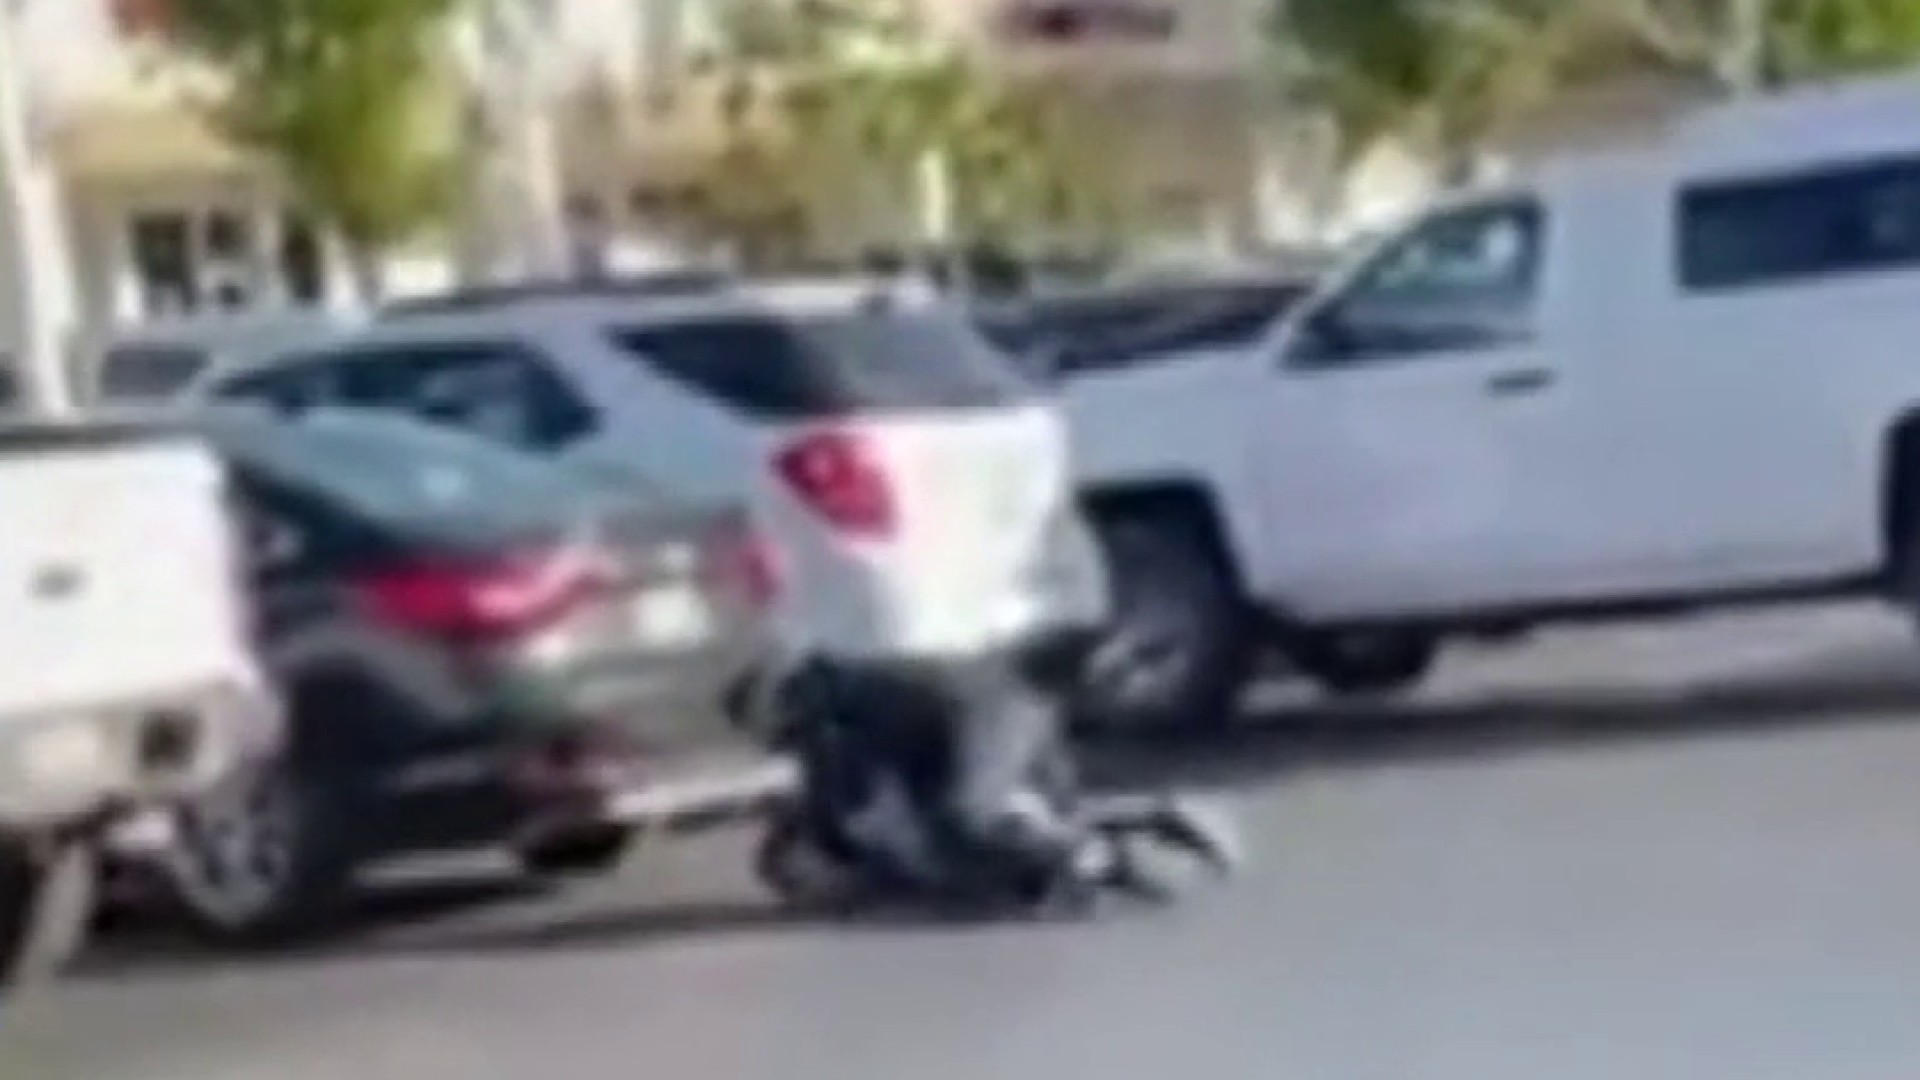 Video Hemet Rough Arrest Spurred From Missing License Plate Leads to Lawsuit